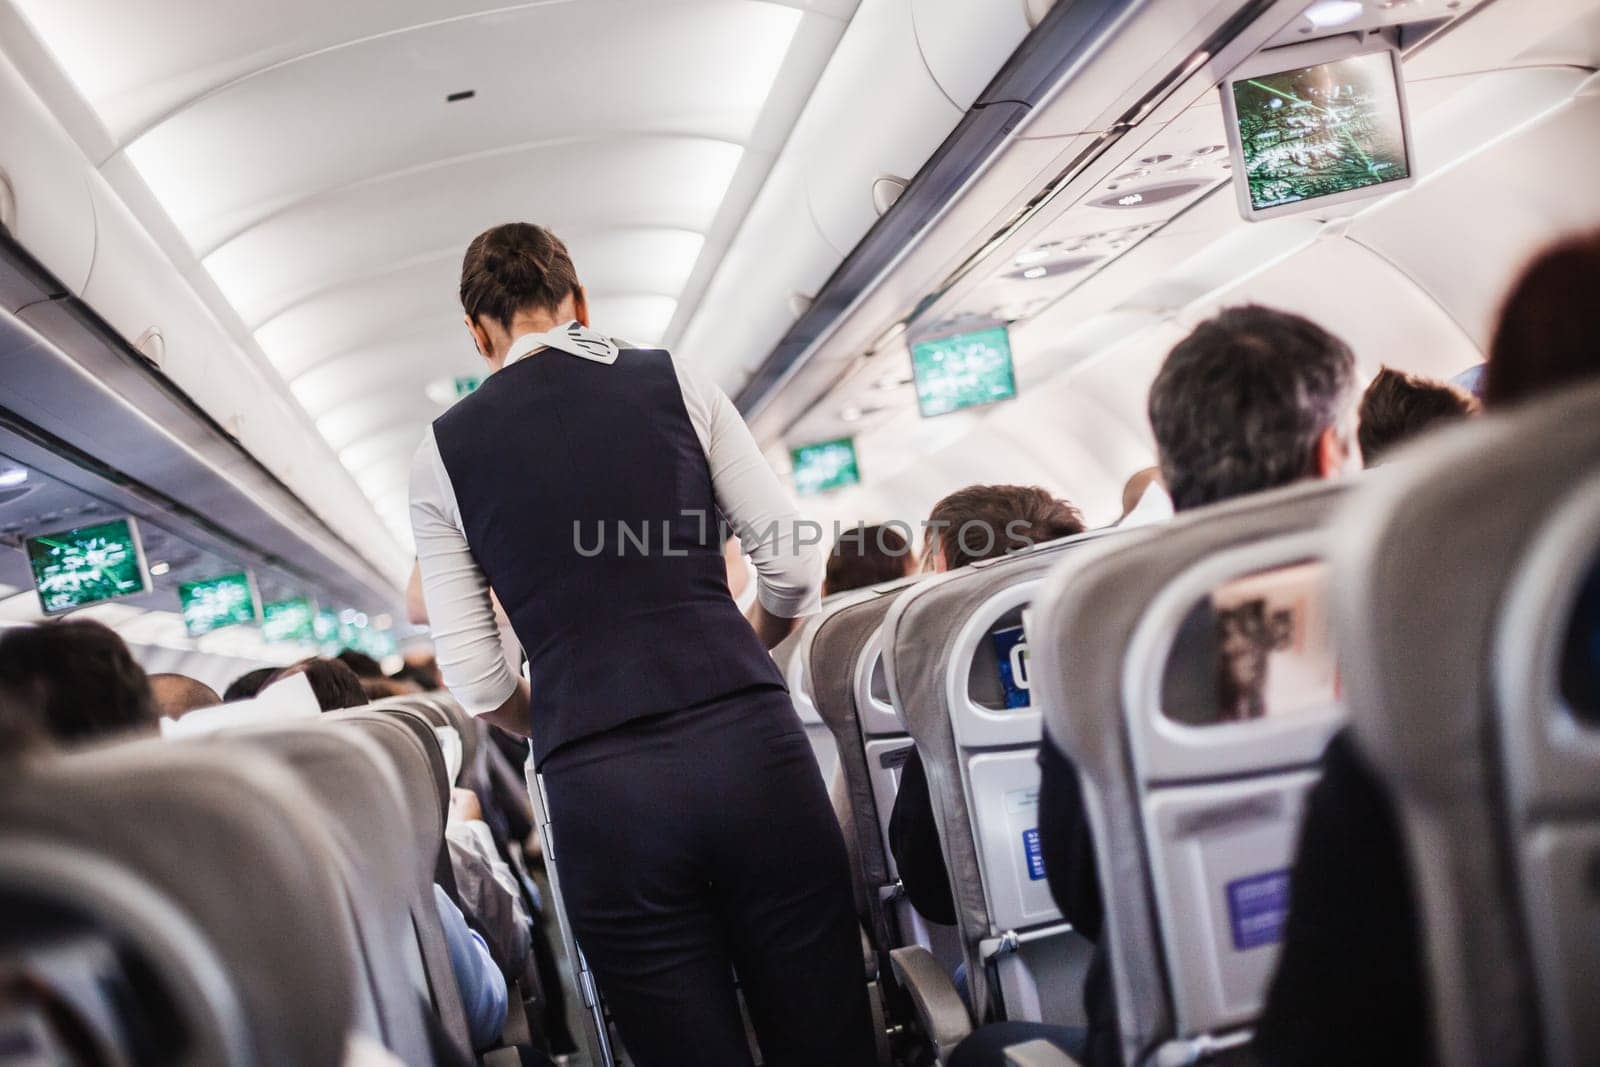 Interior of airplane with passengers on seats and stewardess in uniform walking the aisle, serving people. Commercial economy flight service concept